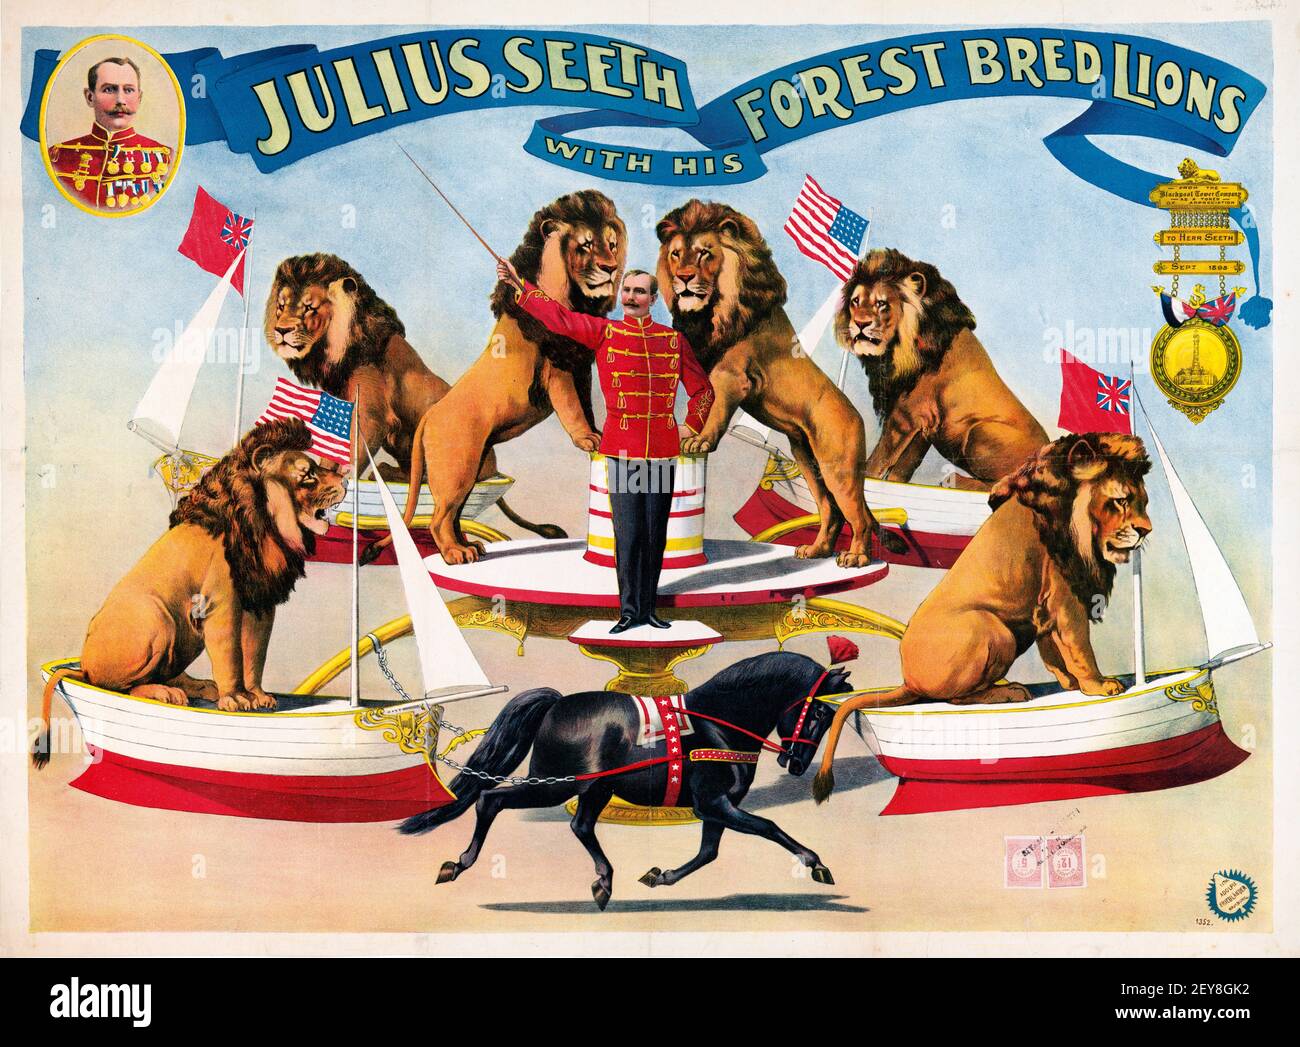 Julius Seeth with his Forest Bred Lions. Old and vintage style. Stock Photo